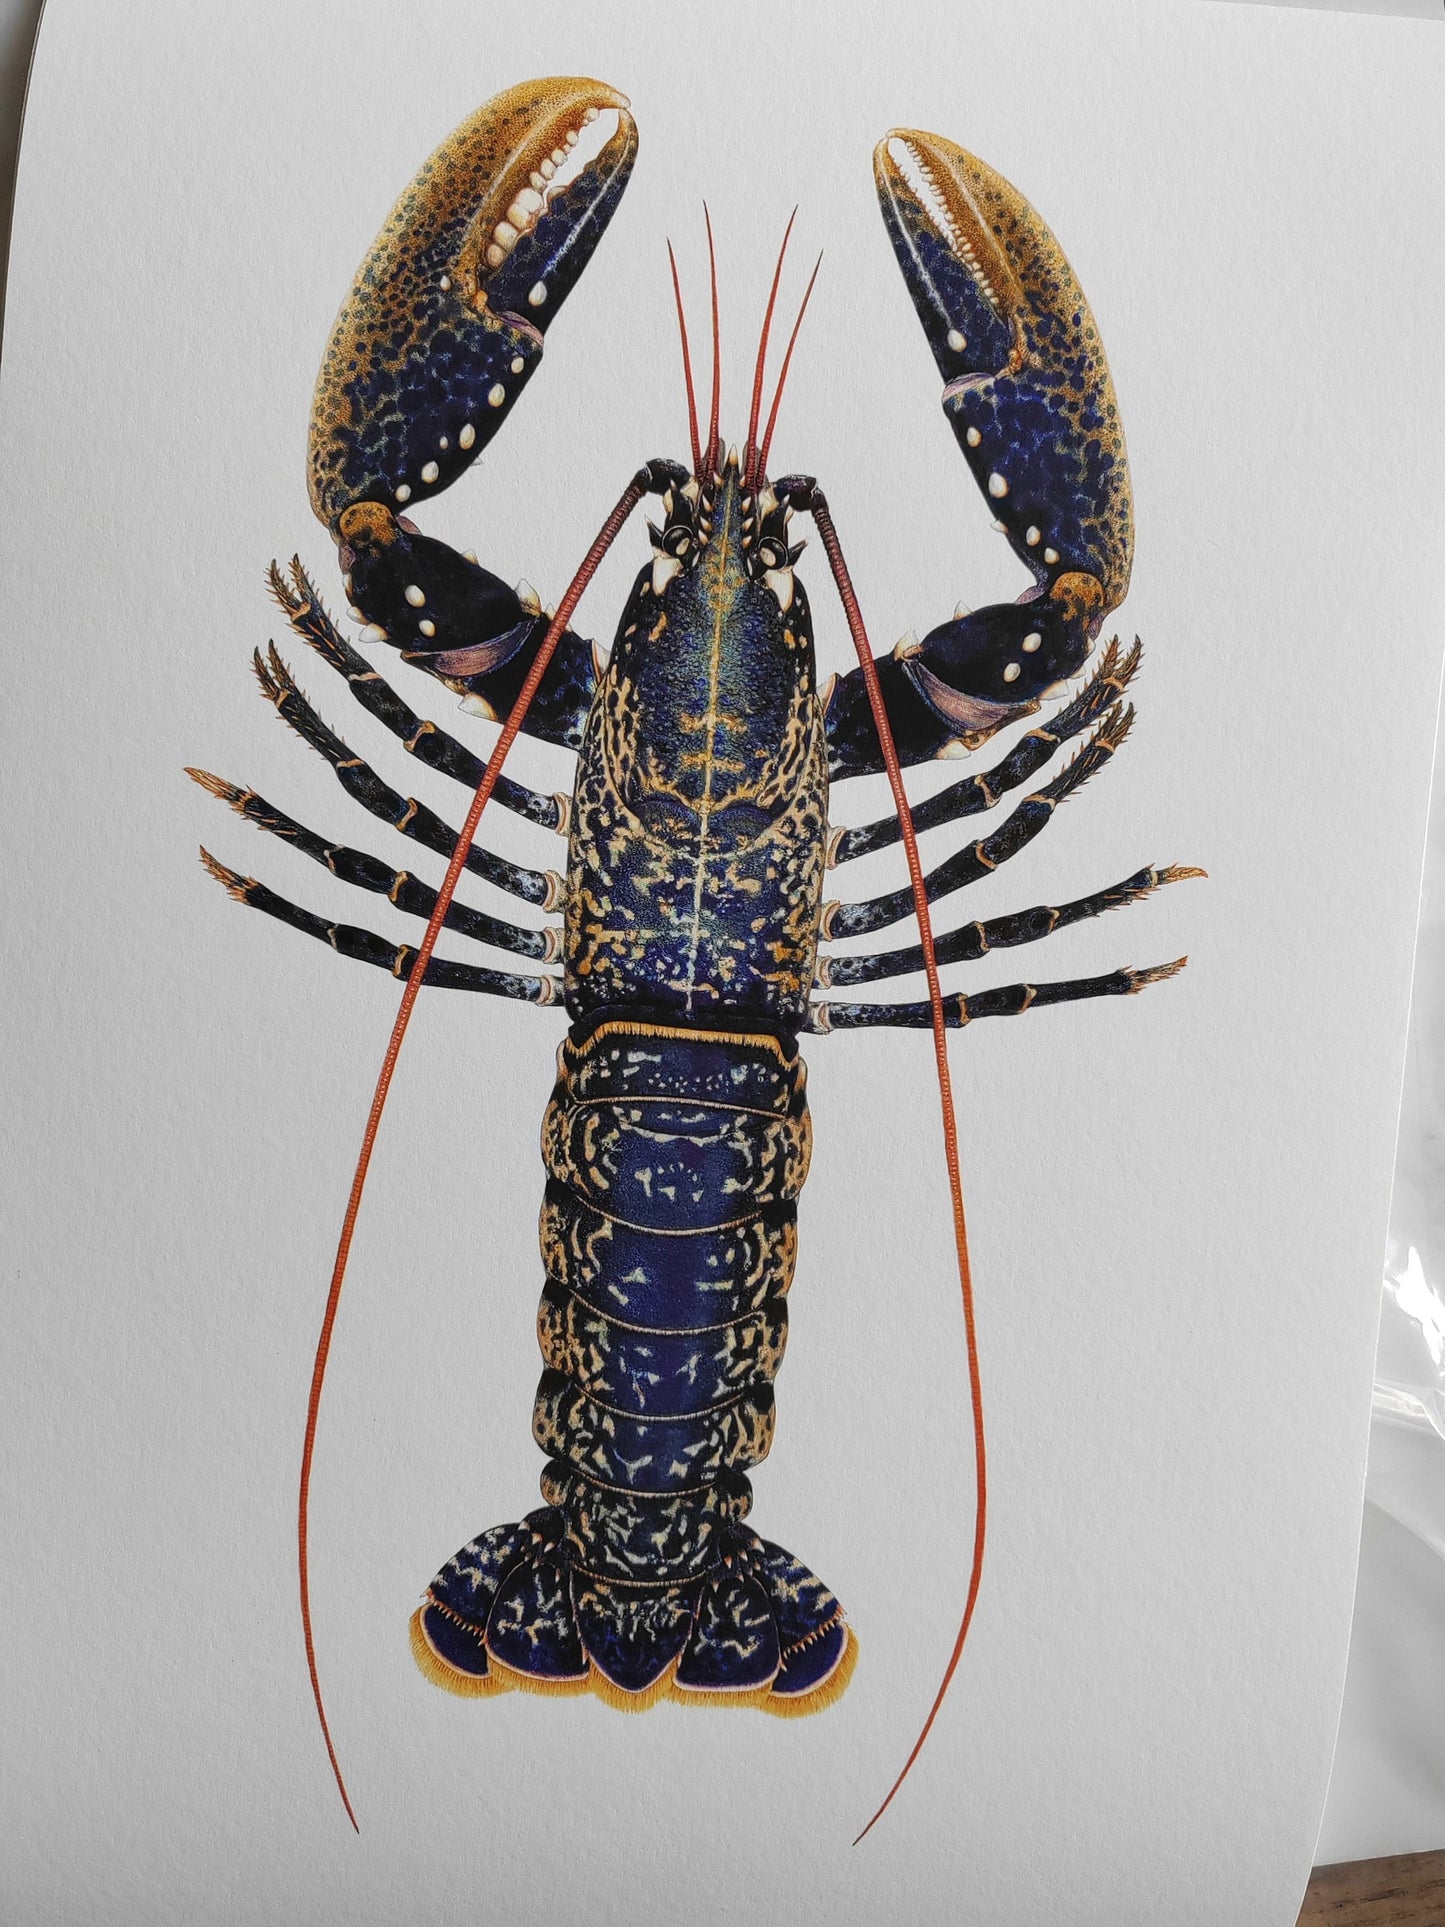 Homarus gammarus, Lobster A3 size limited edition art print